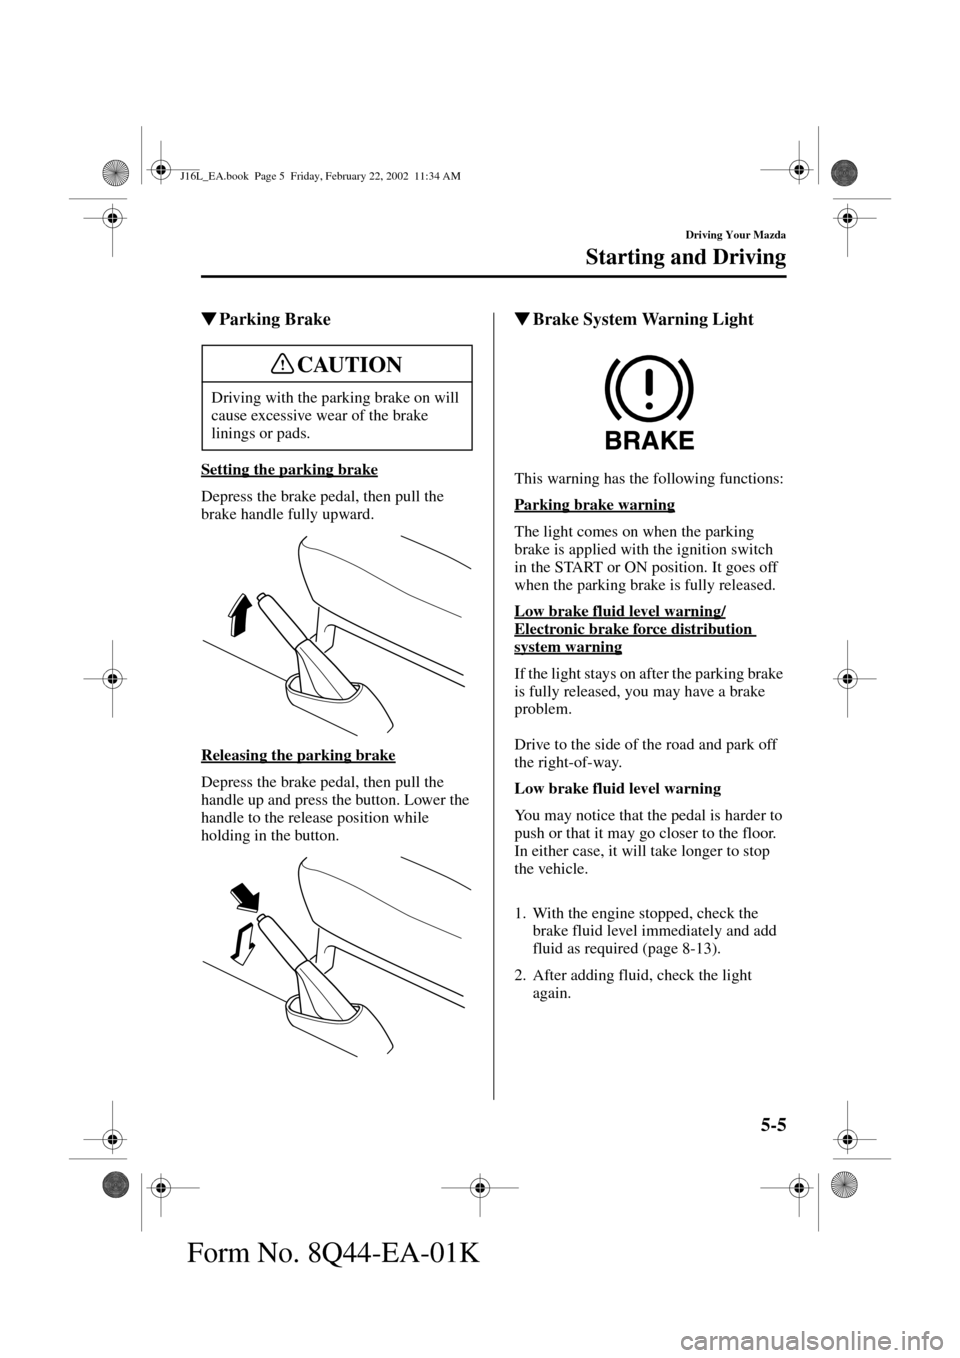 MAZDA MODEL MPV 2002  Owners Manual (in English) 5-5
Driving Your Mazda
Starting and Driving
Form No. 8Q44-EA-01K
Parking Brake
Setting the parking brake
Depress the brake pedal, then pull the 
brake handle fully upward.
Releasing the parking brake